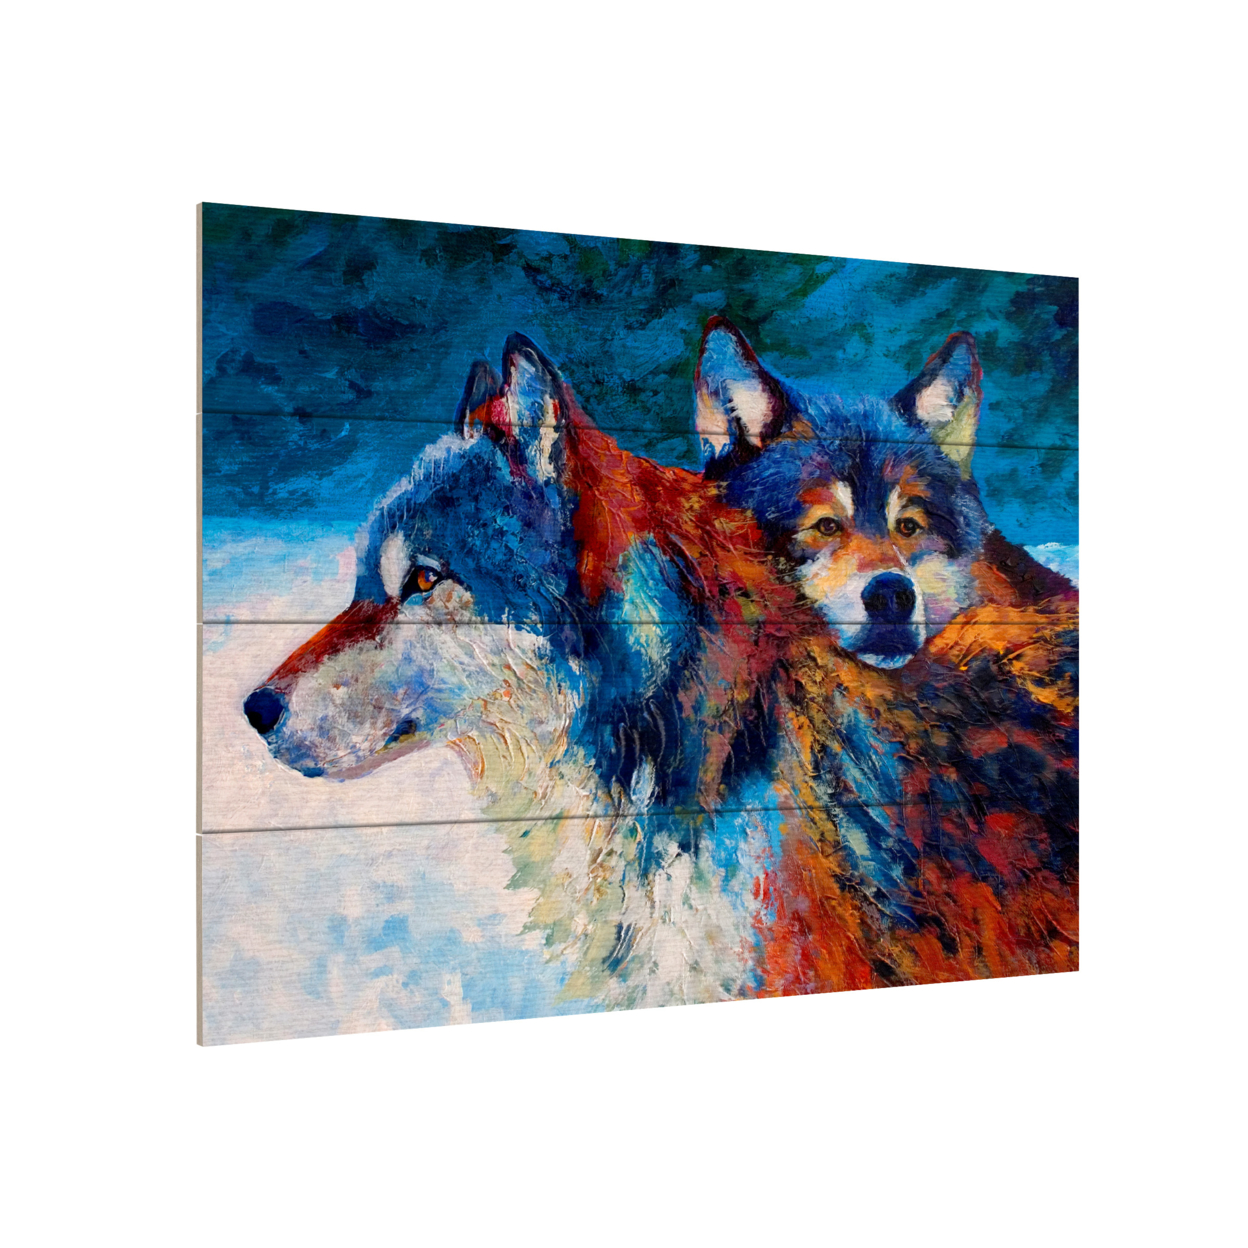 Wall Art 12 X 16 Inches Titled Wolves Ready To Hang Printed On Wooden Planks